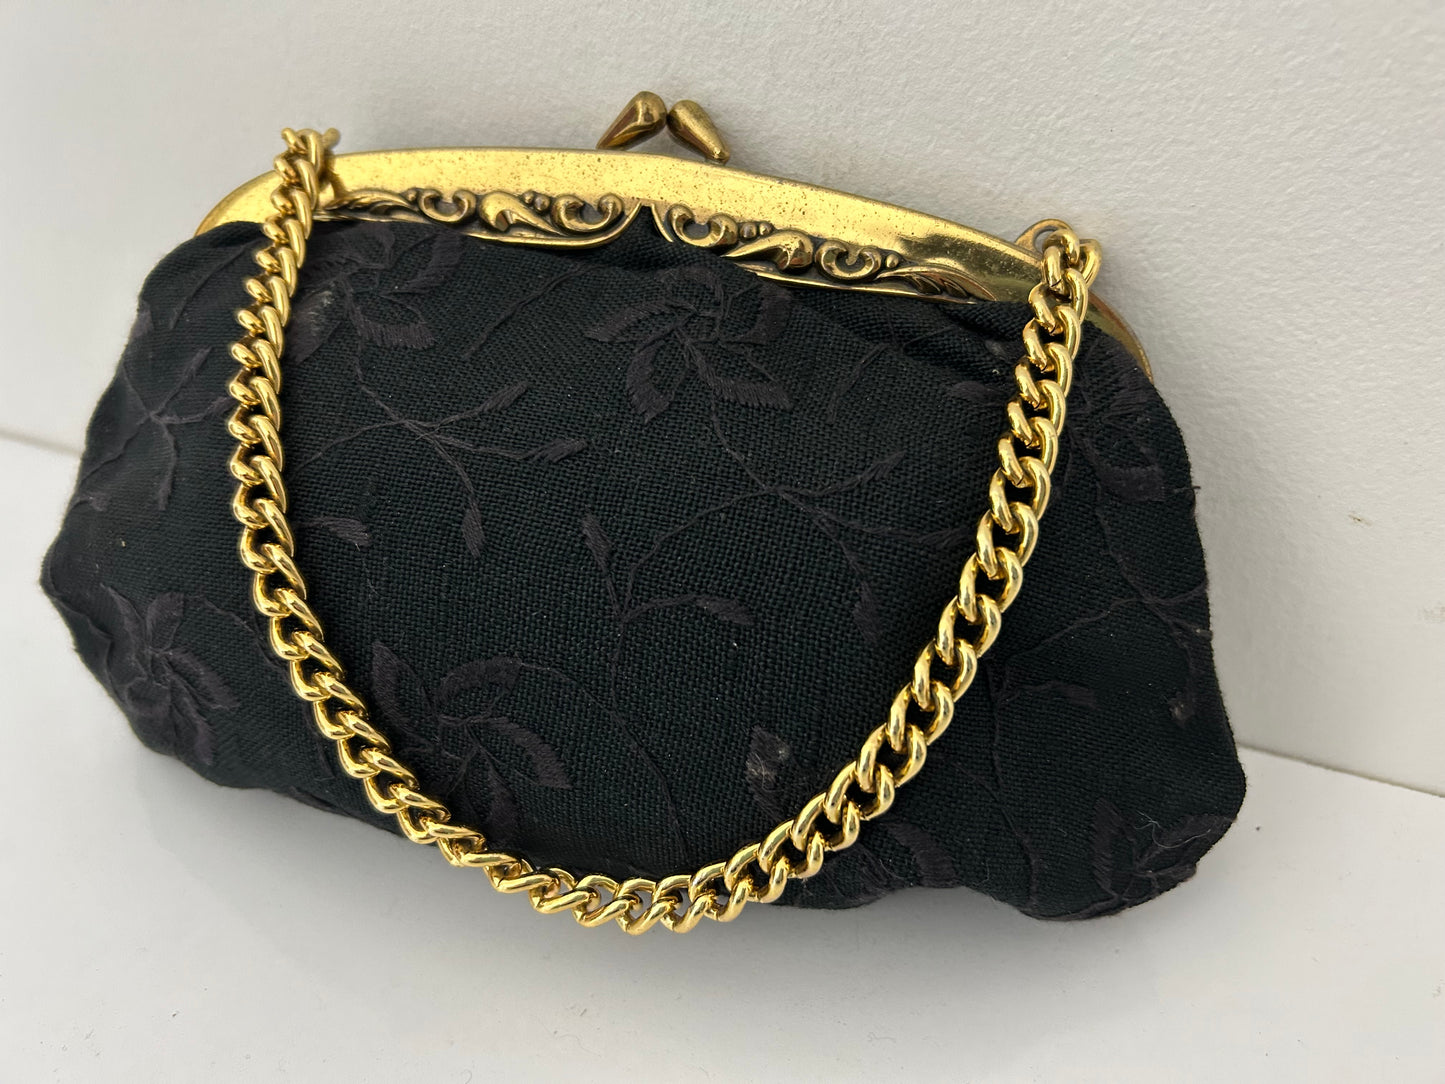 Vintage 1950s Small Black Embroidered Fabric Evening Bag With Chain Handle